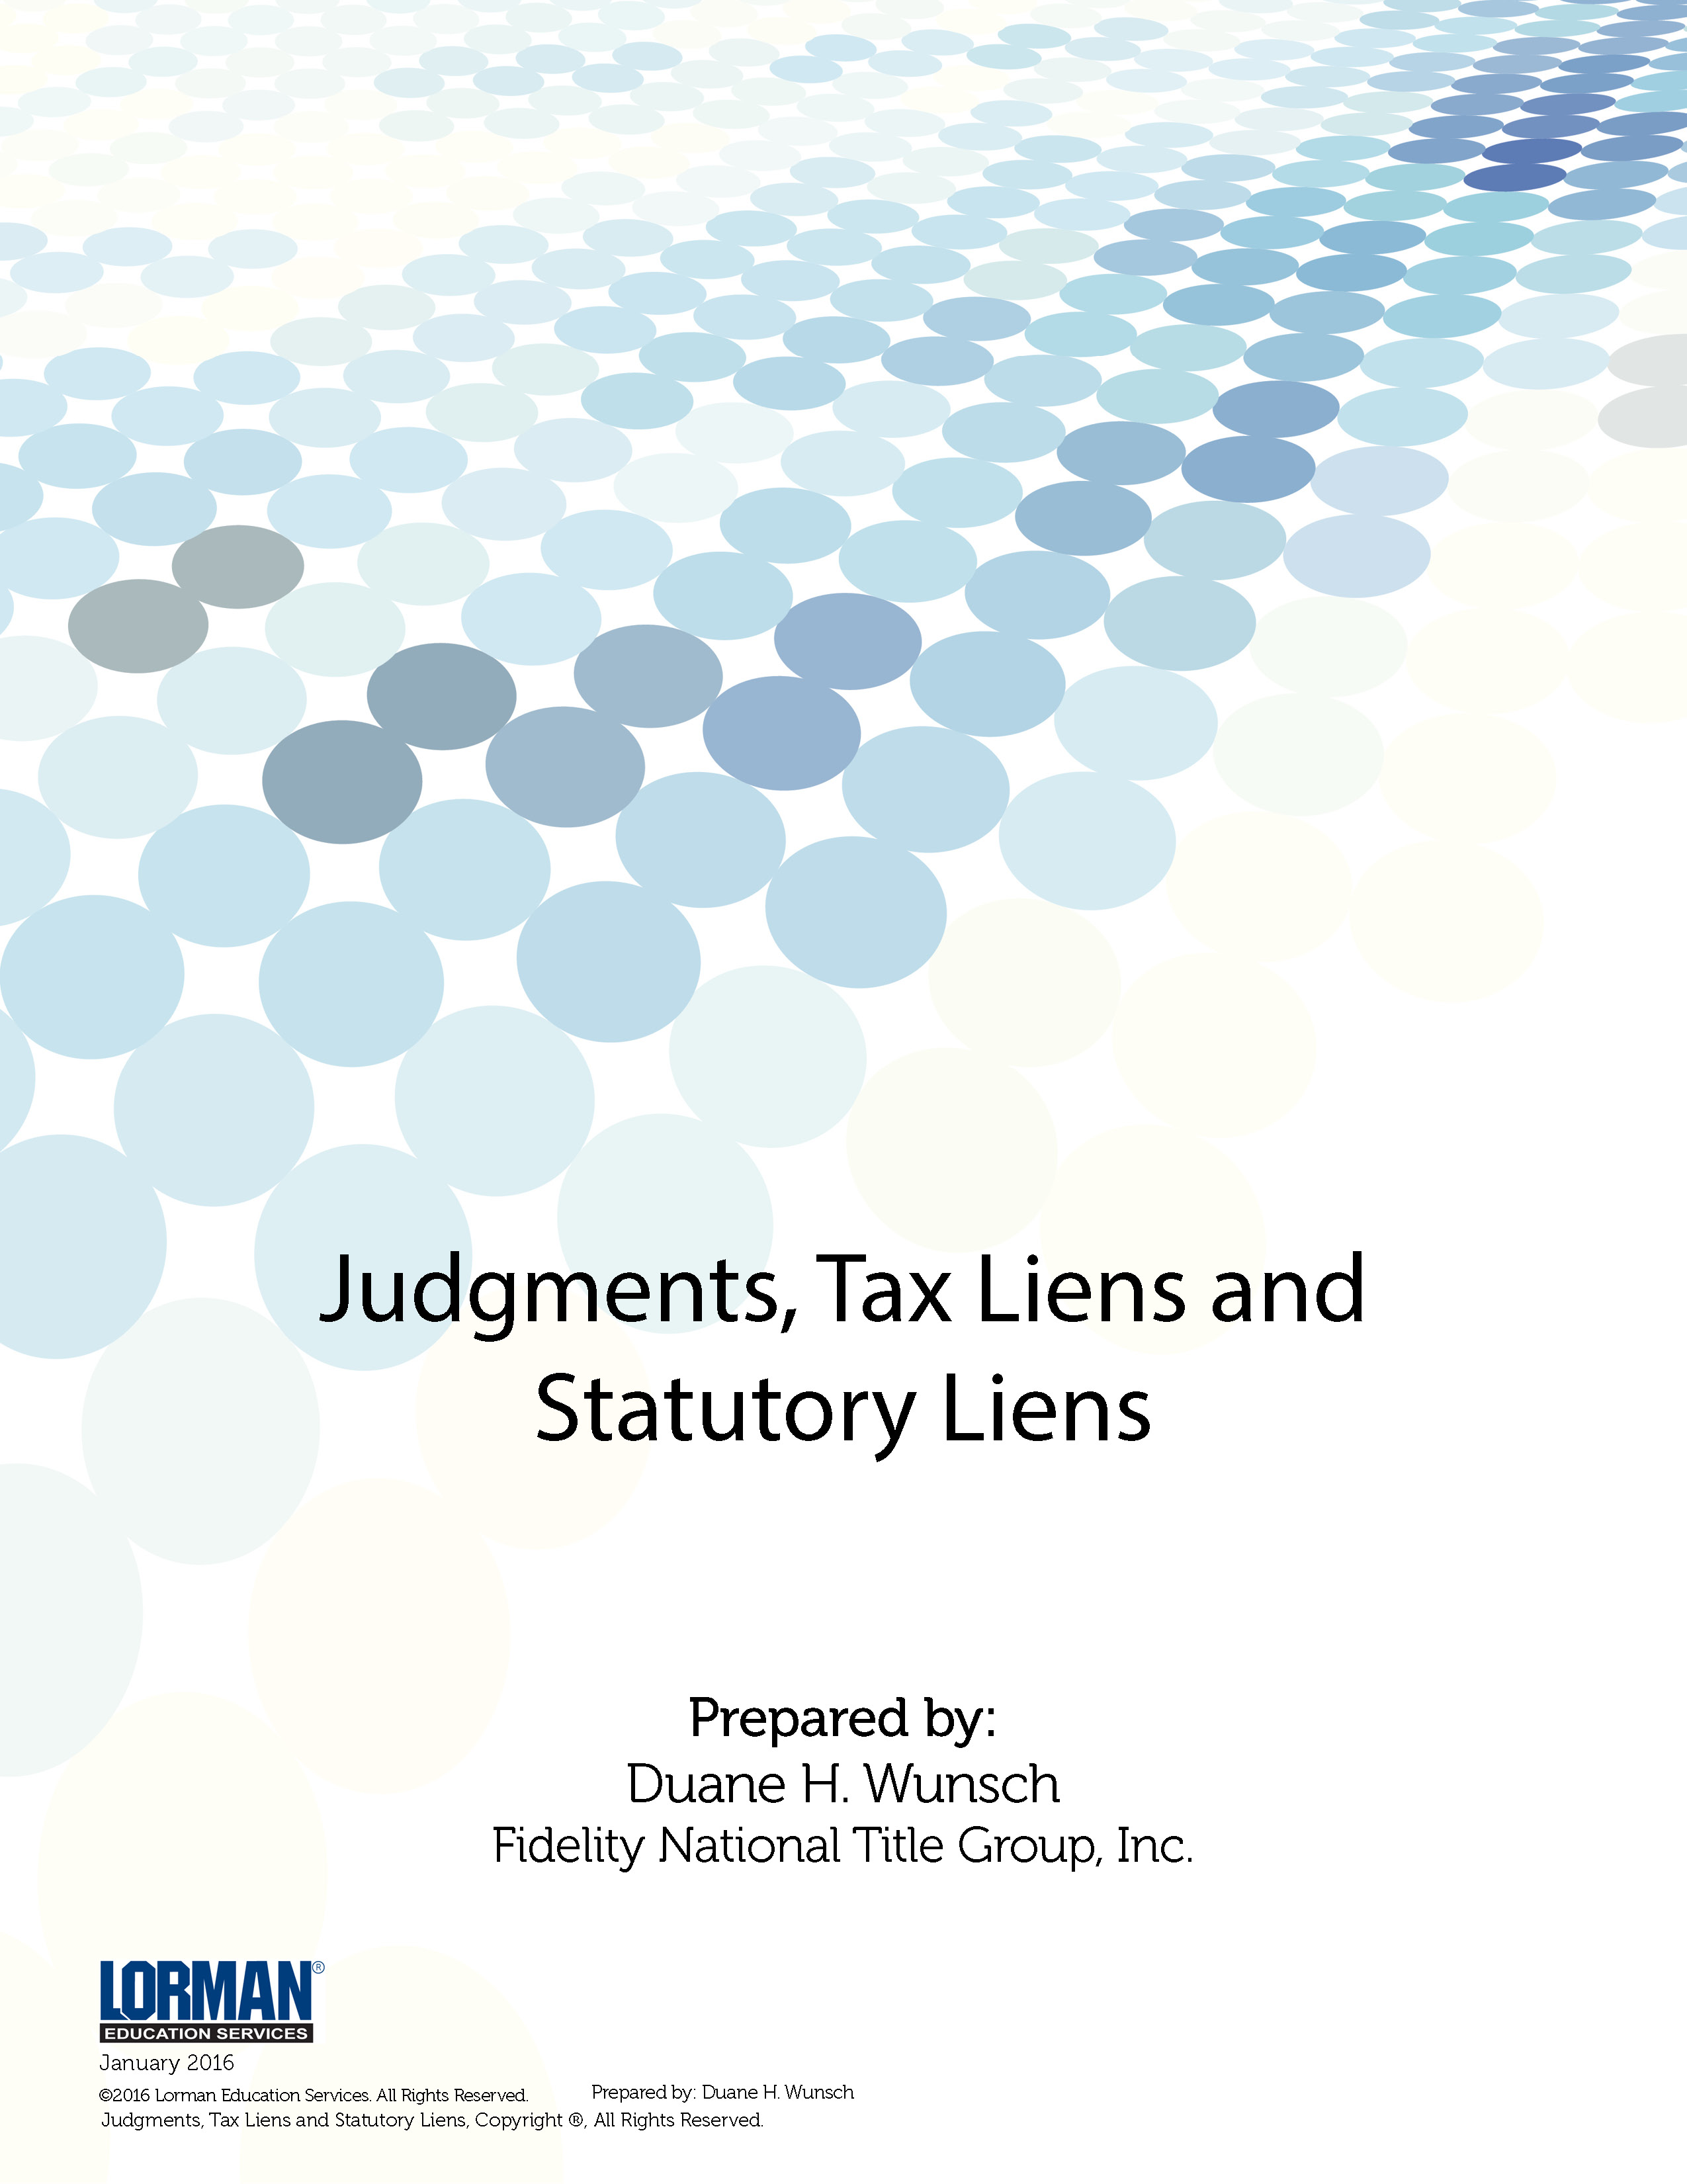 Judgments, Tax Liens and Statutory Liens